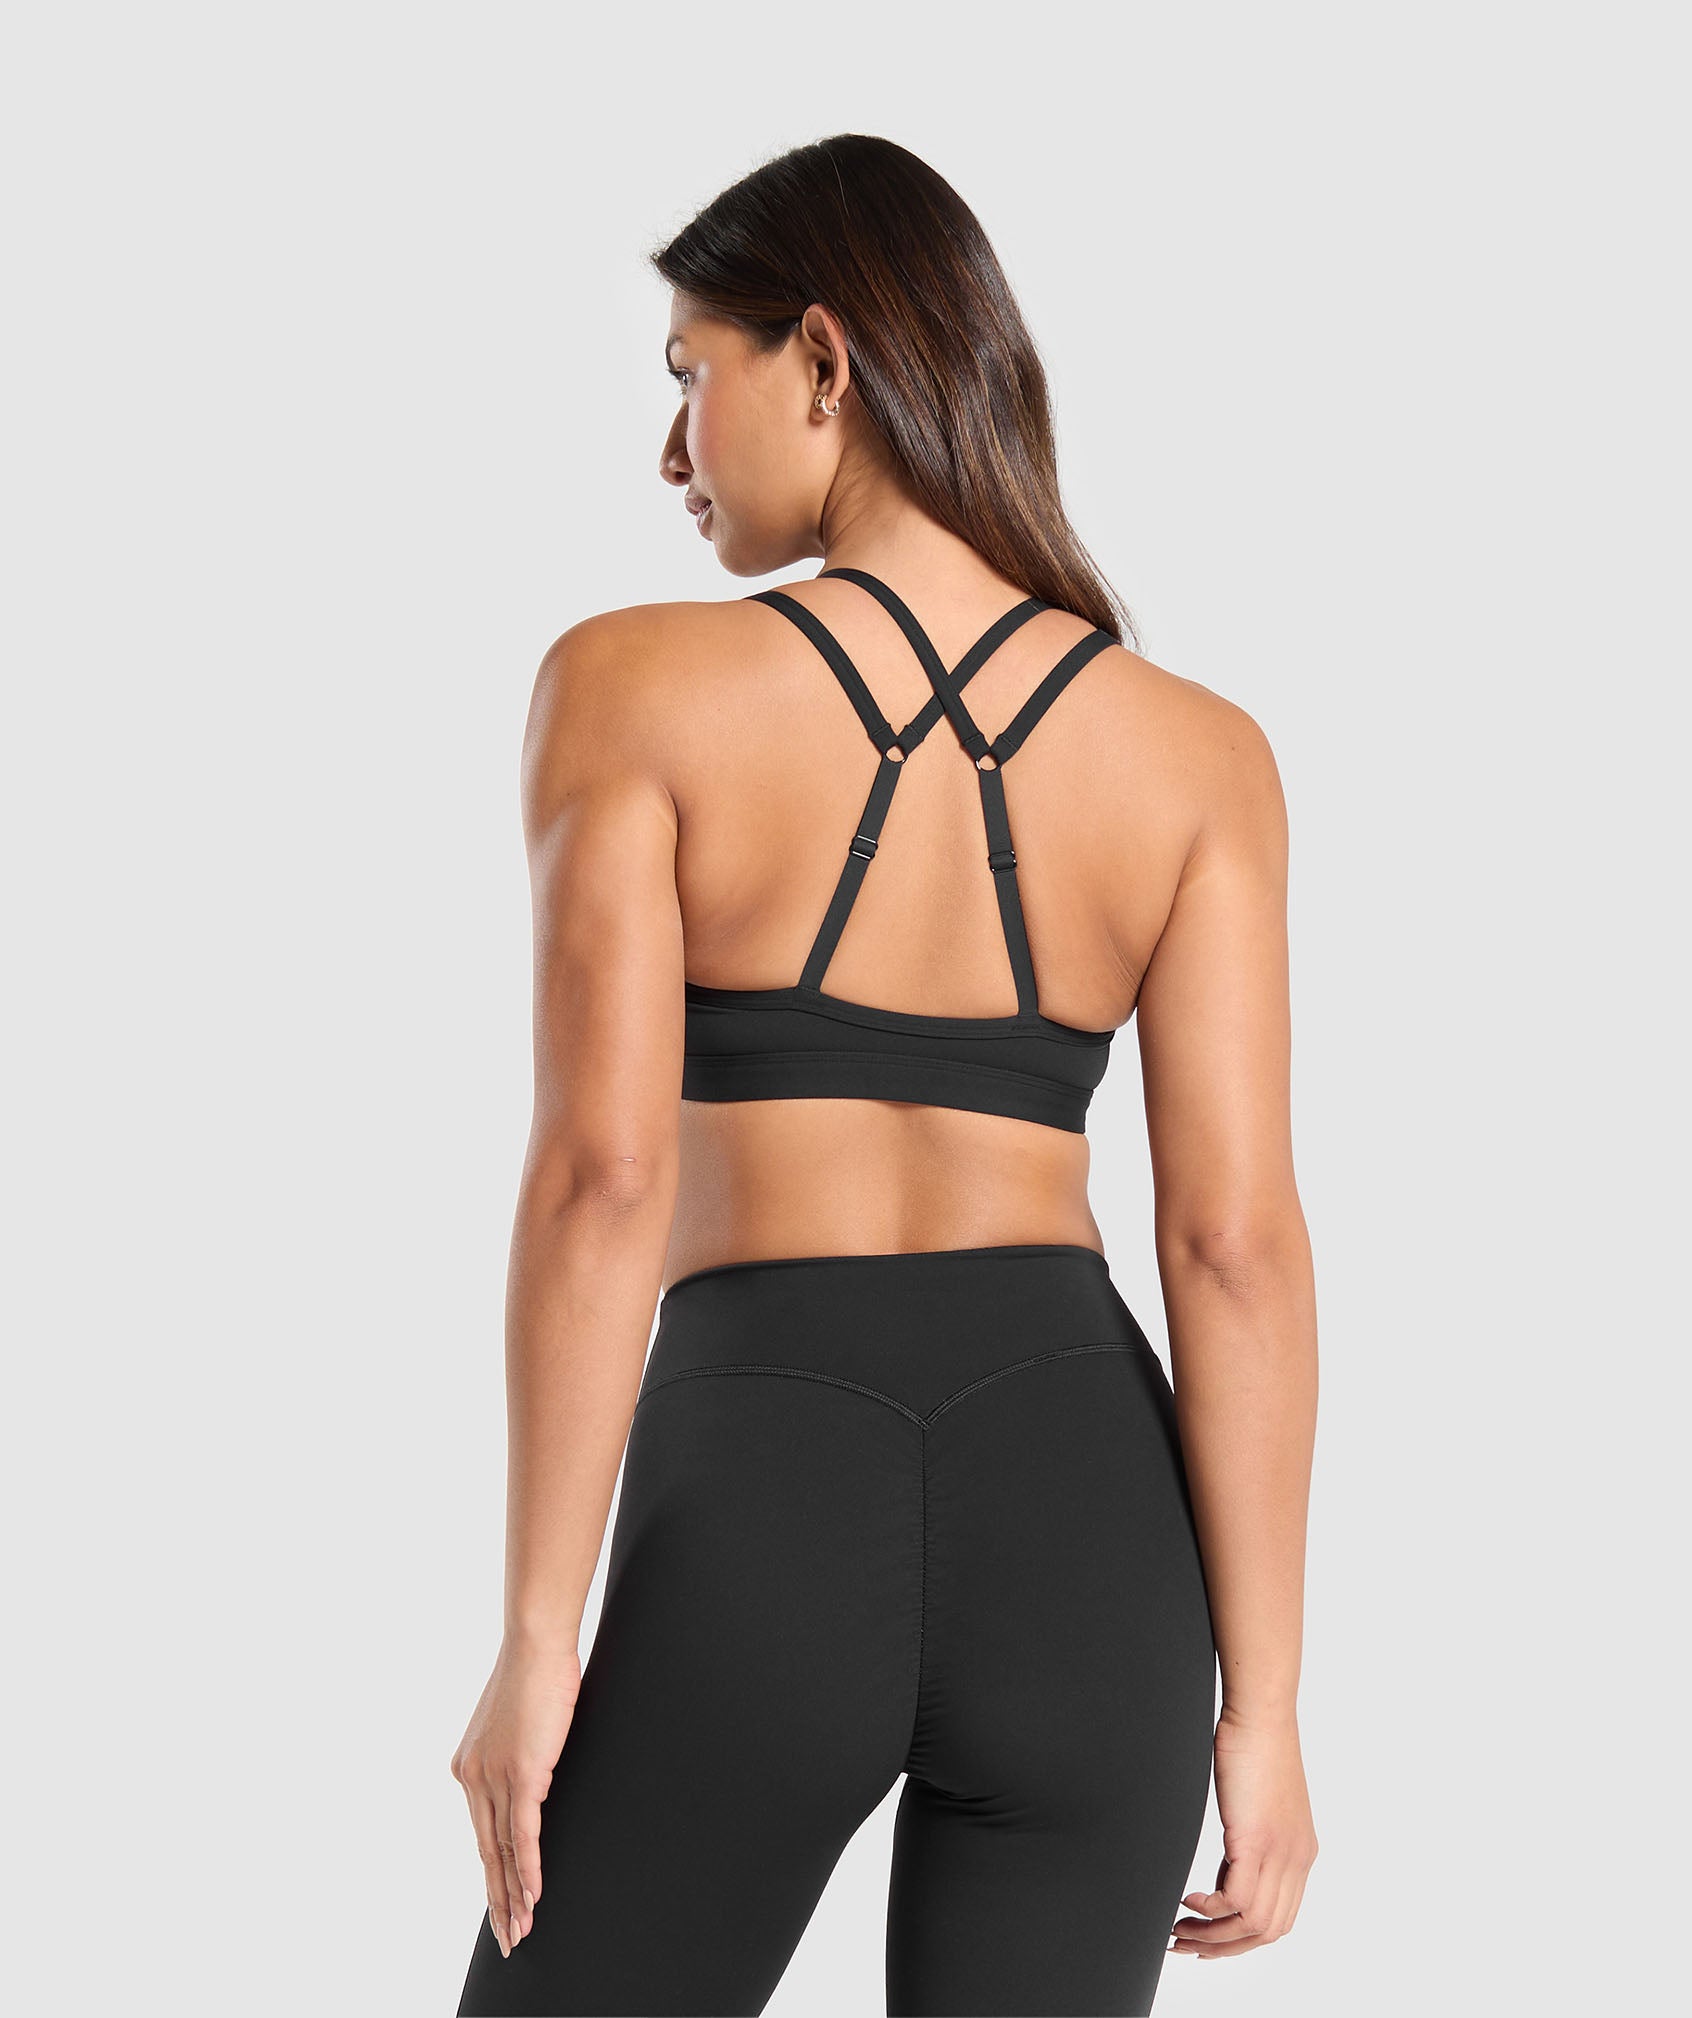 Double Up Sports Bra in Black - view 2